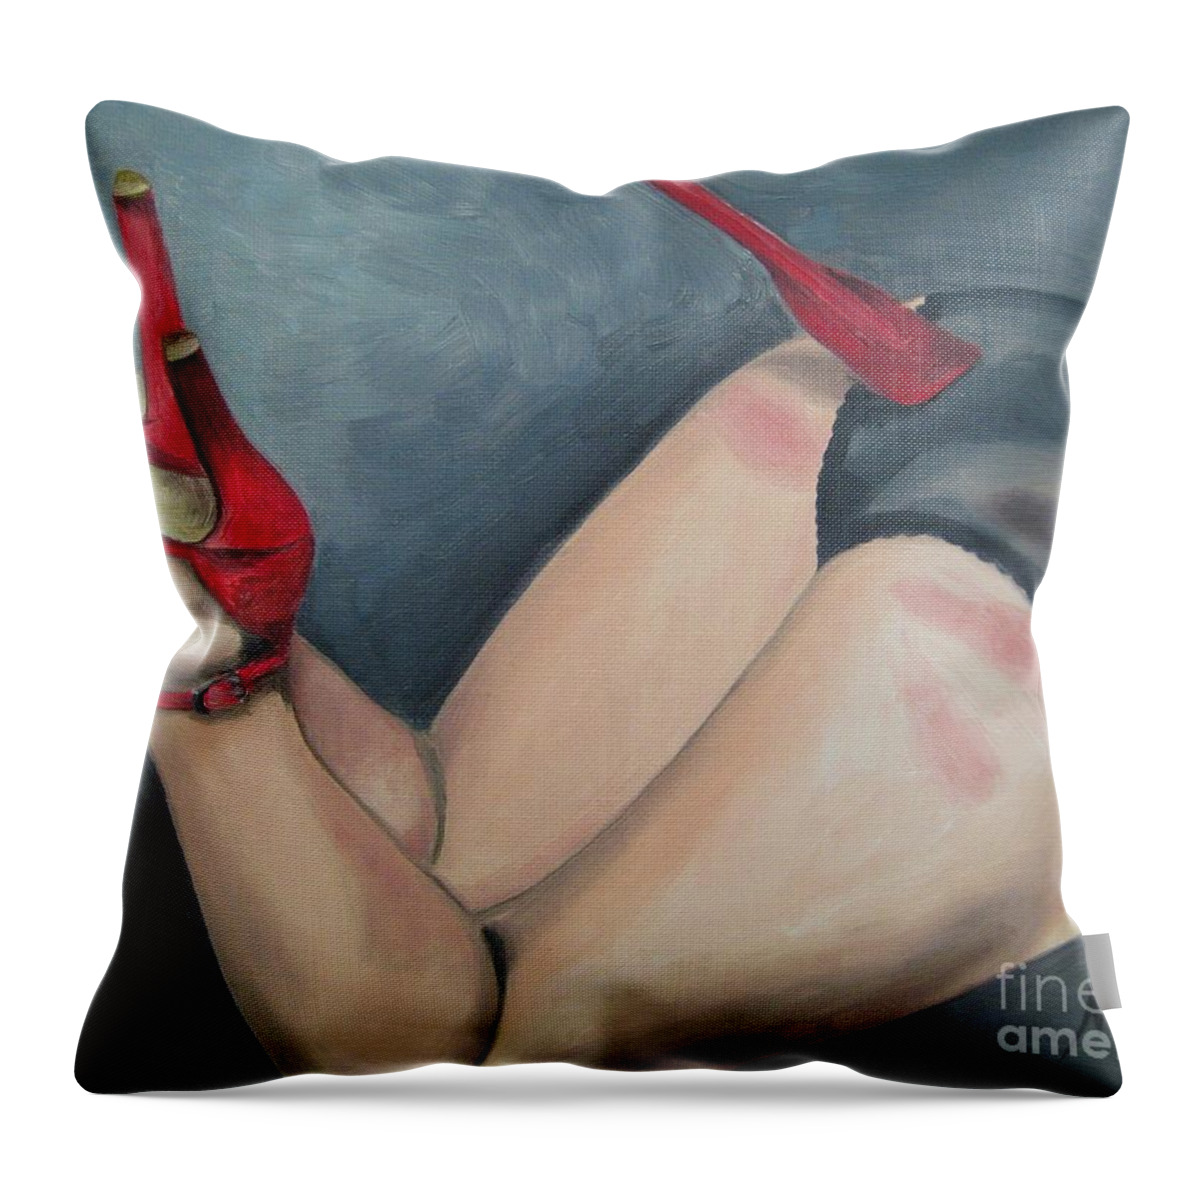 Noewi Throw Pillow featuring the painting Matching Set by Jindra Noewi